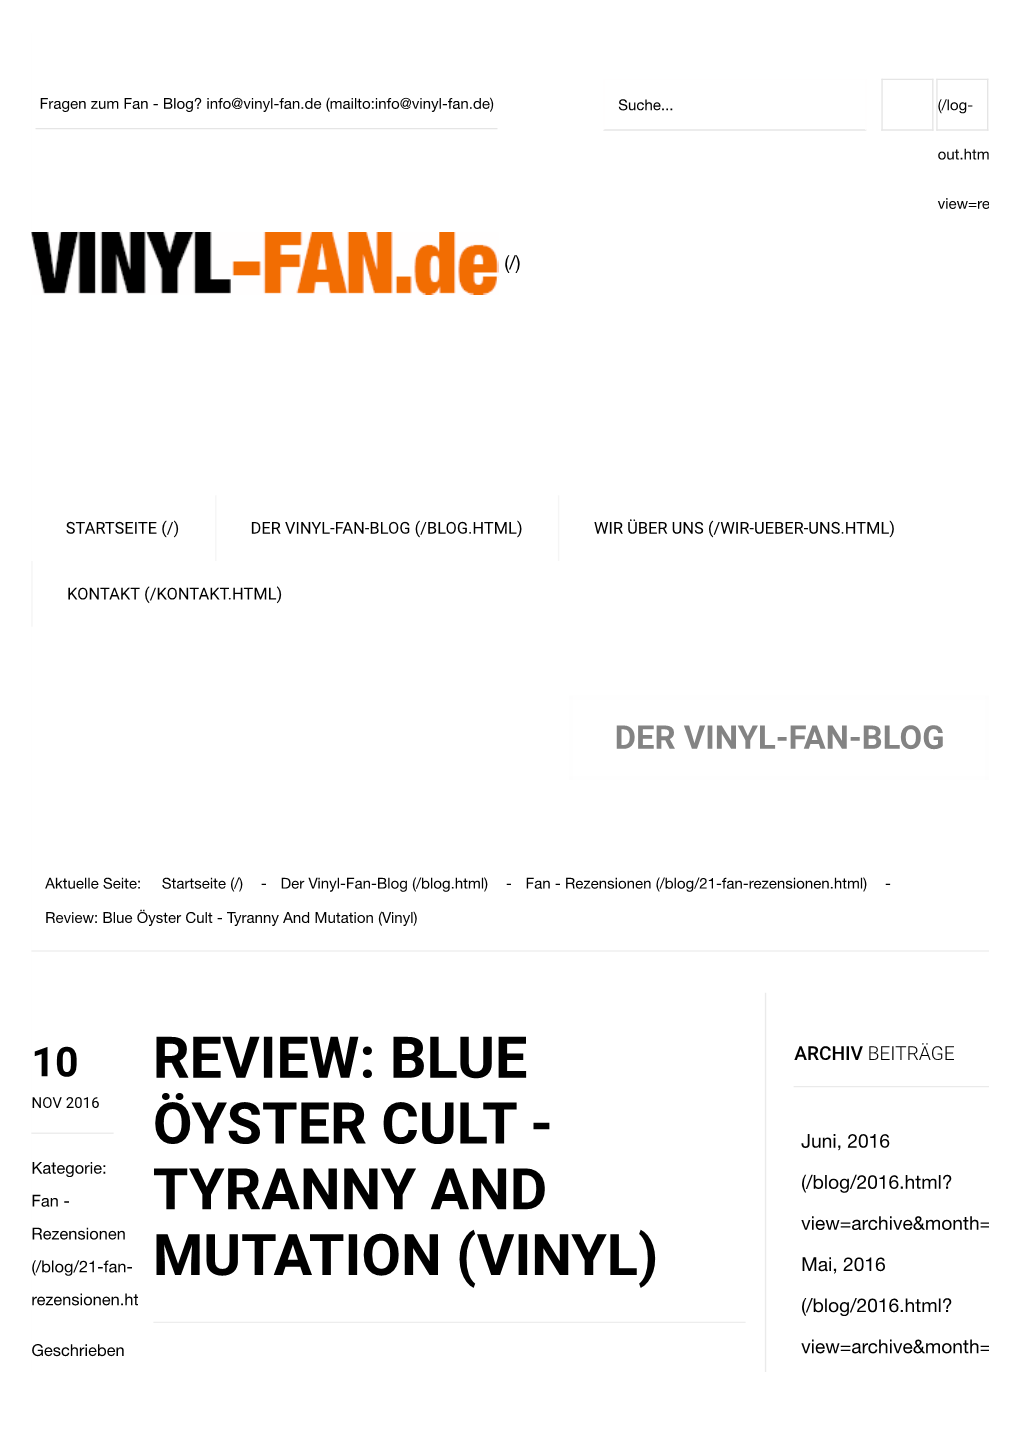 Review: Blue Öyster Cult - Tyranny and Mutation (Vinyl)